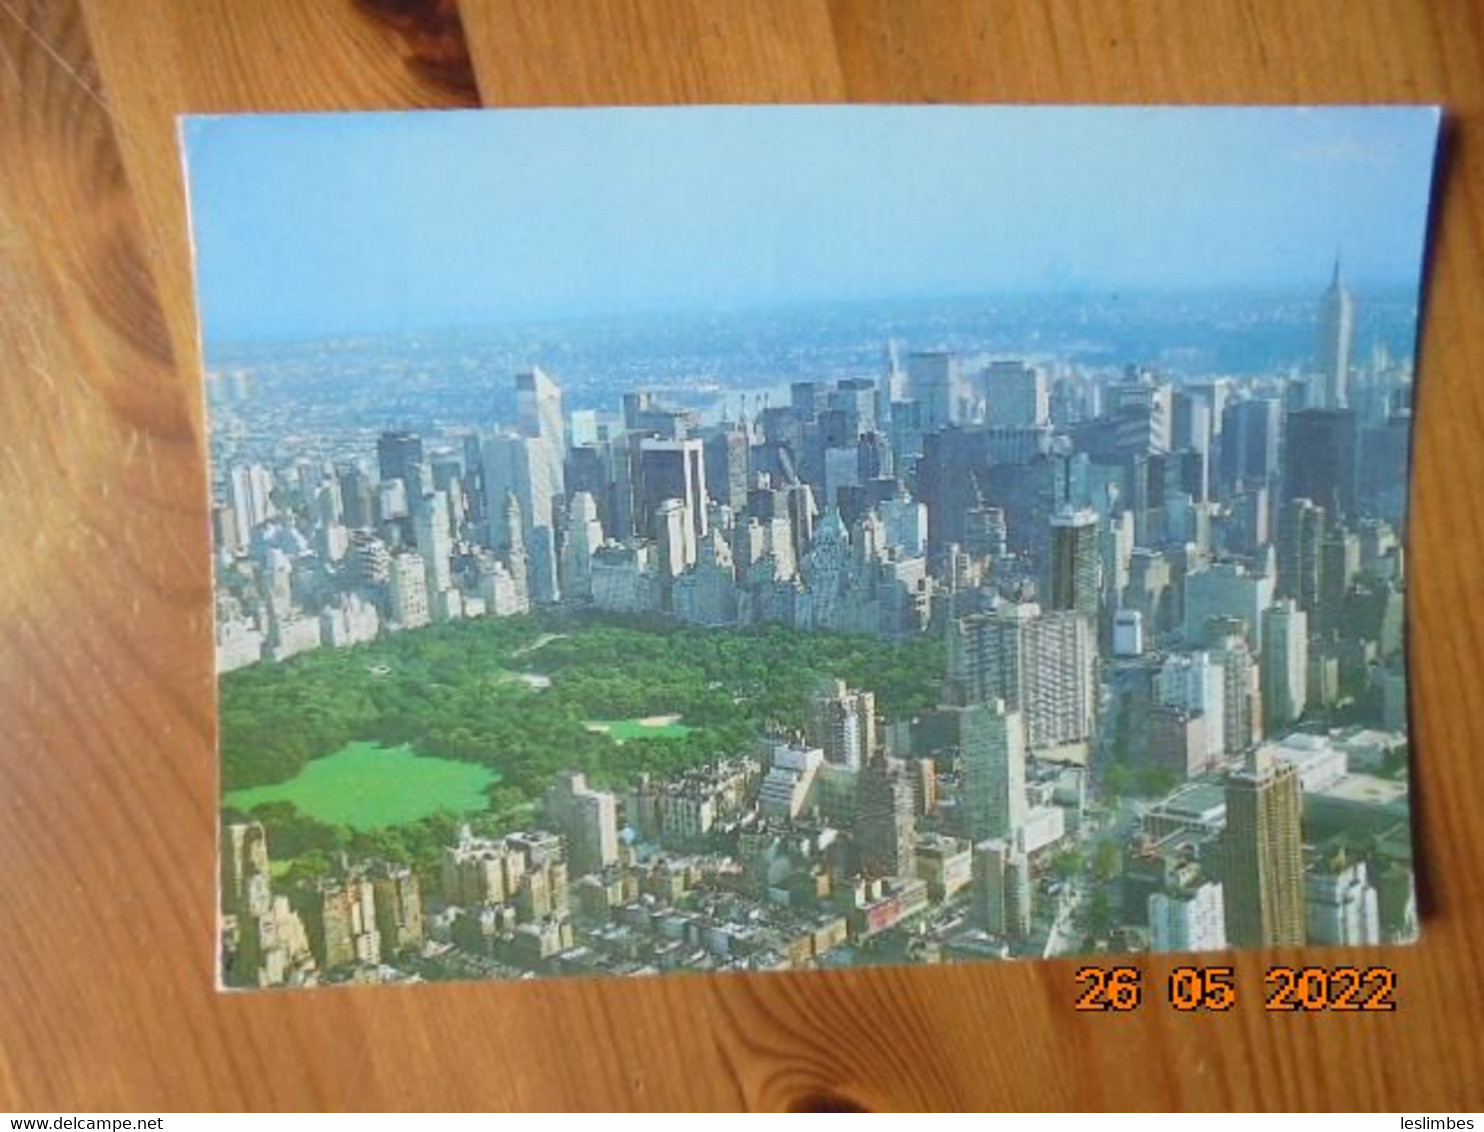 Aerial View Of Central Park And The Surrounding New York Skyline. 1417 PM 1996 - Central Park